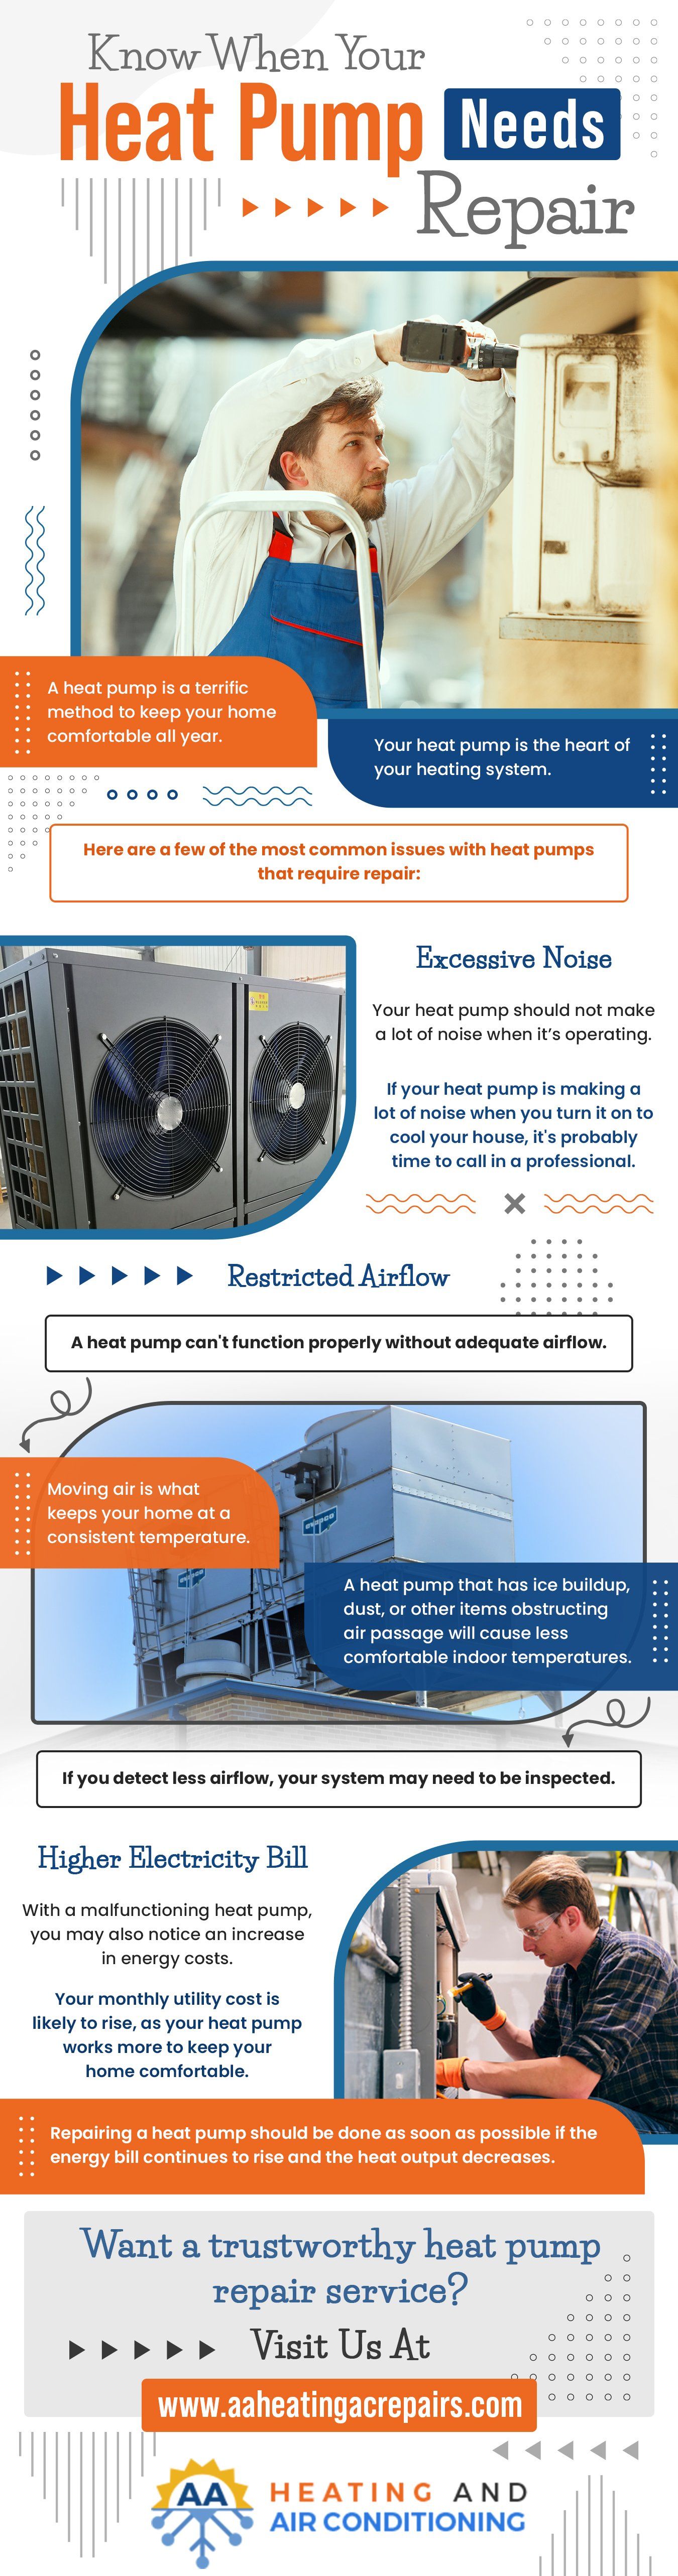 Know When Your Heat Pump Needs Repair Guide